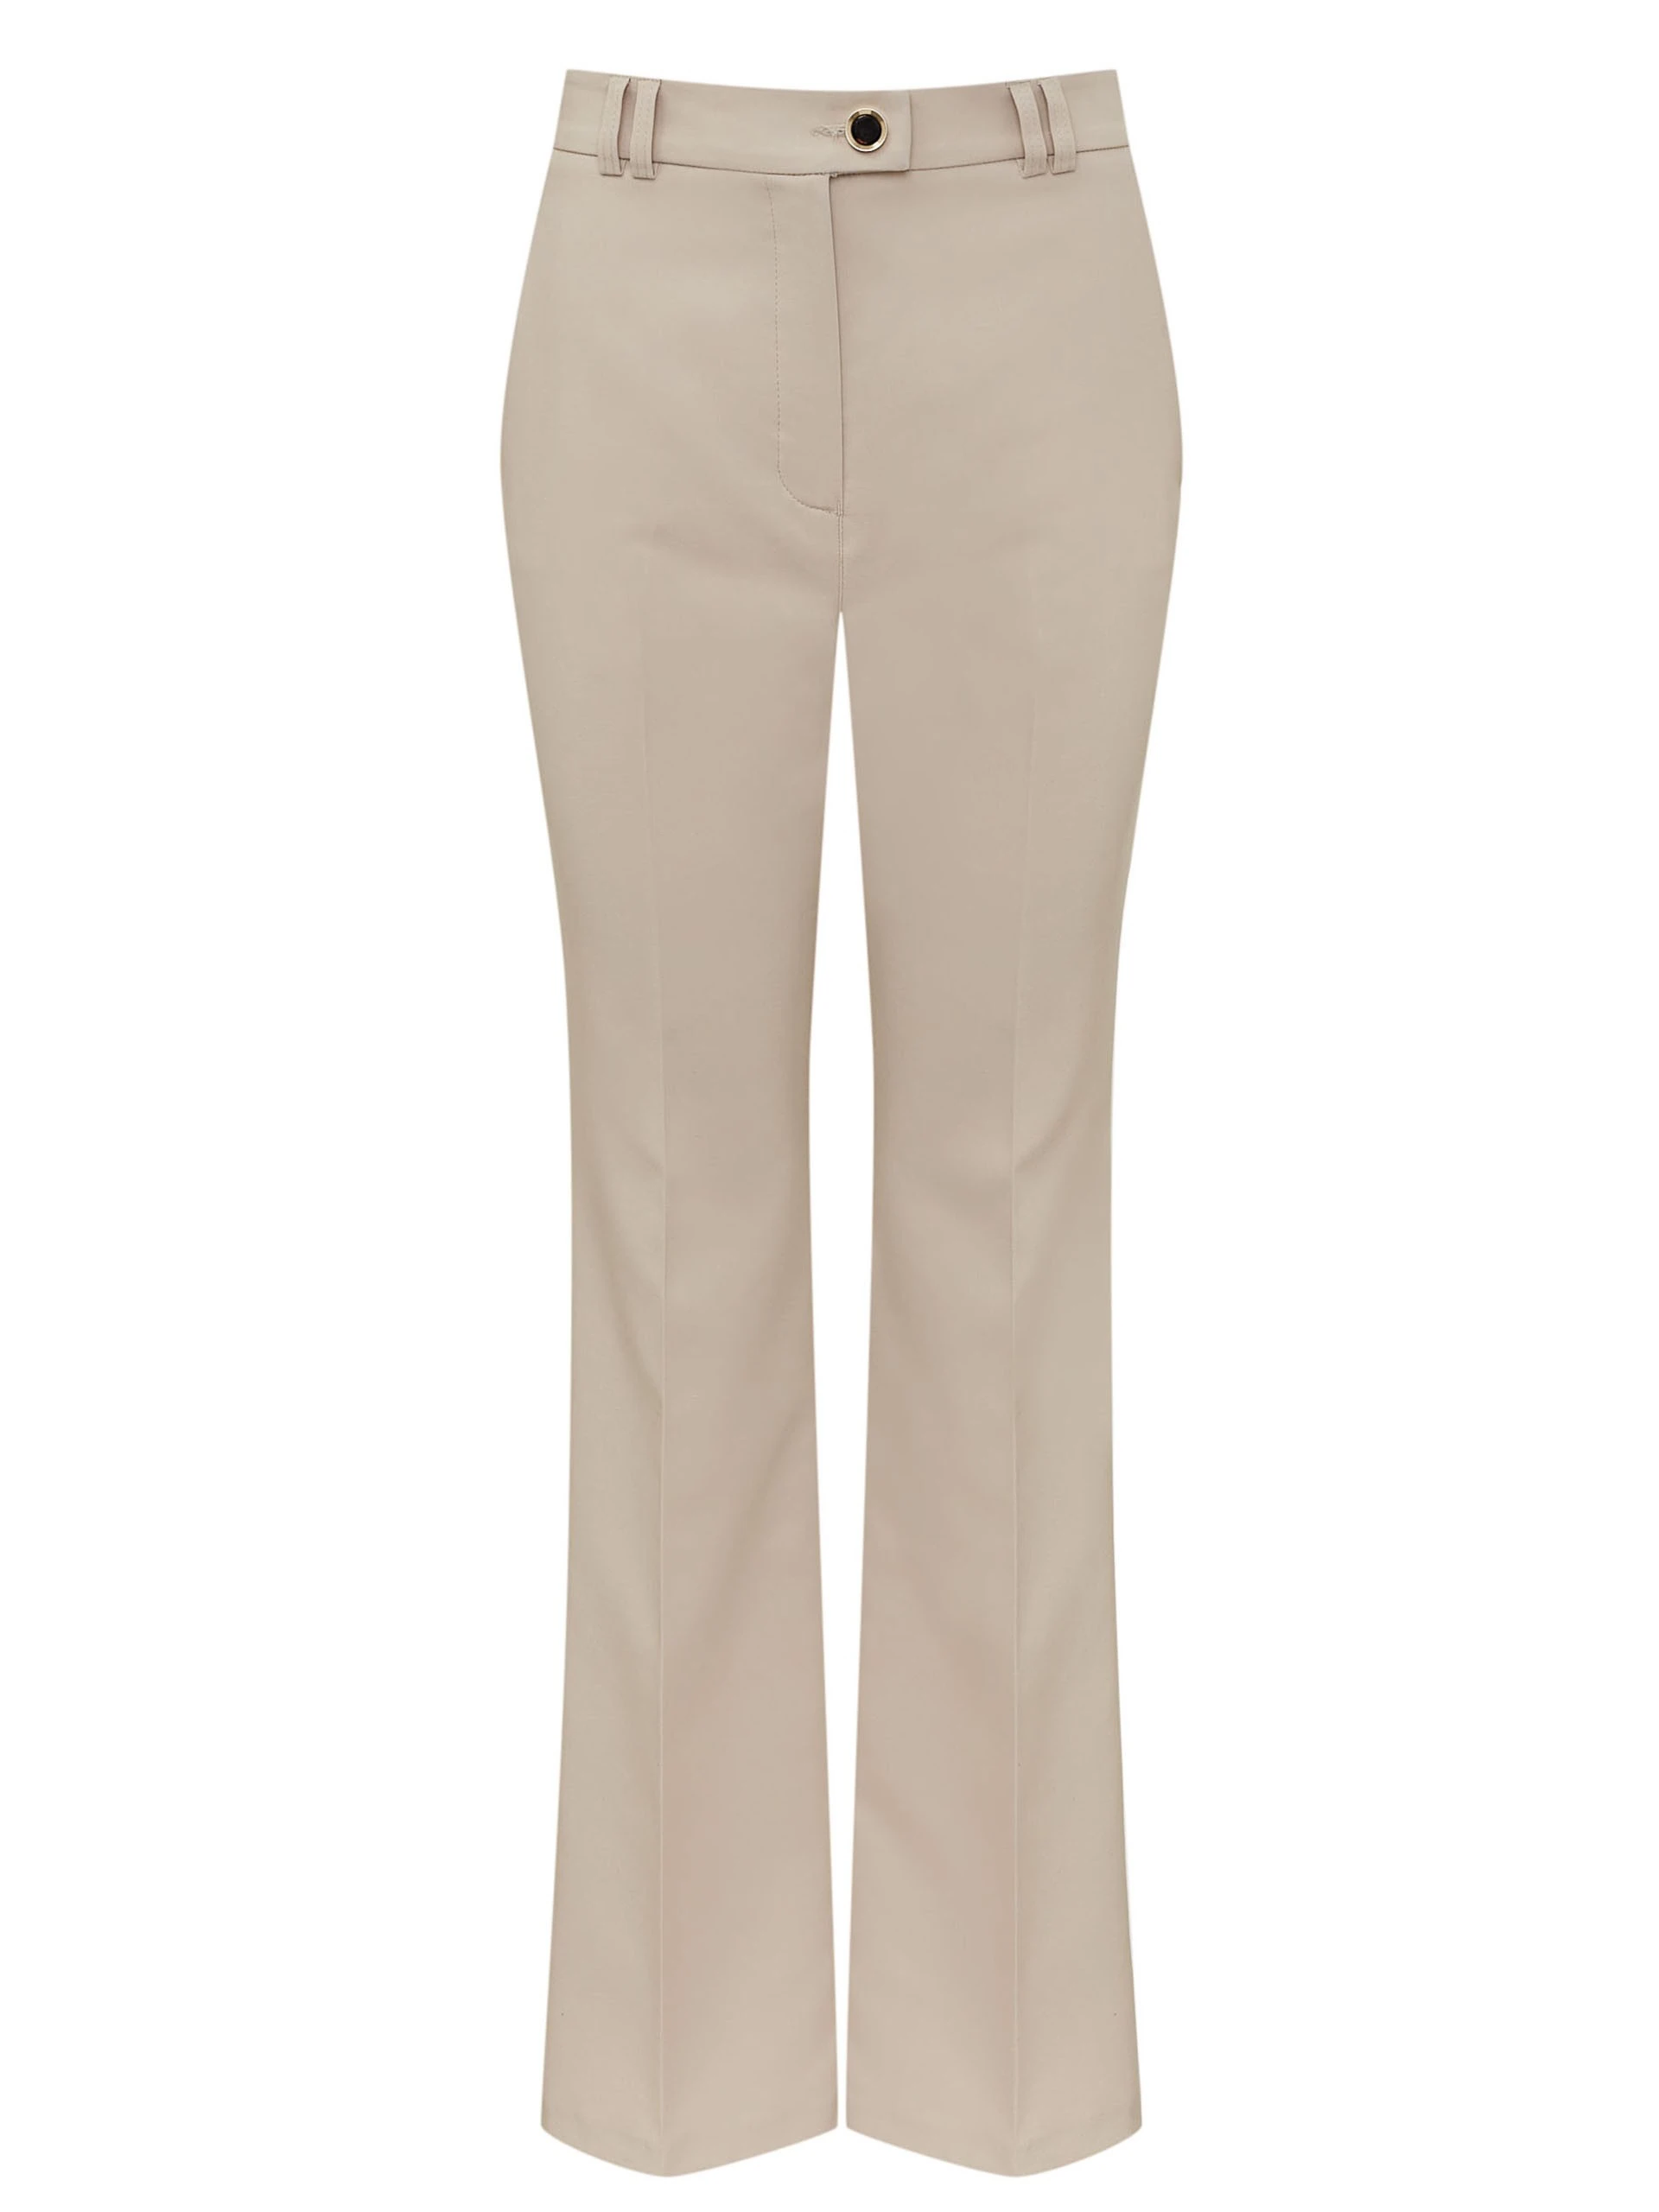 BEIGE PANTS WITH WIDE LEG